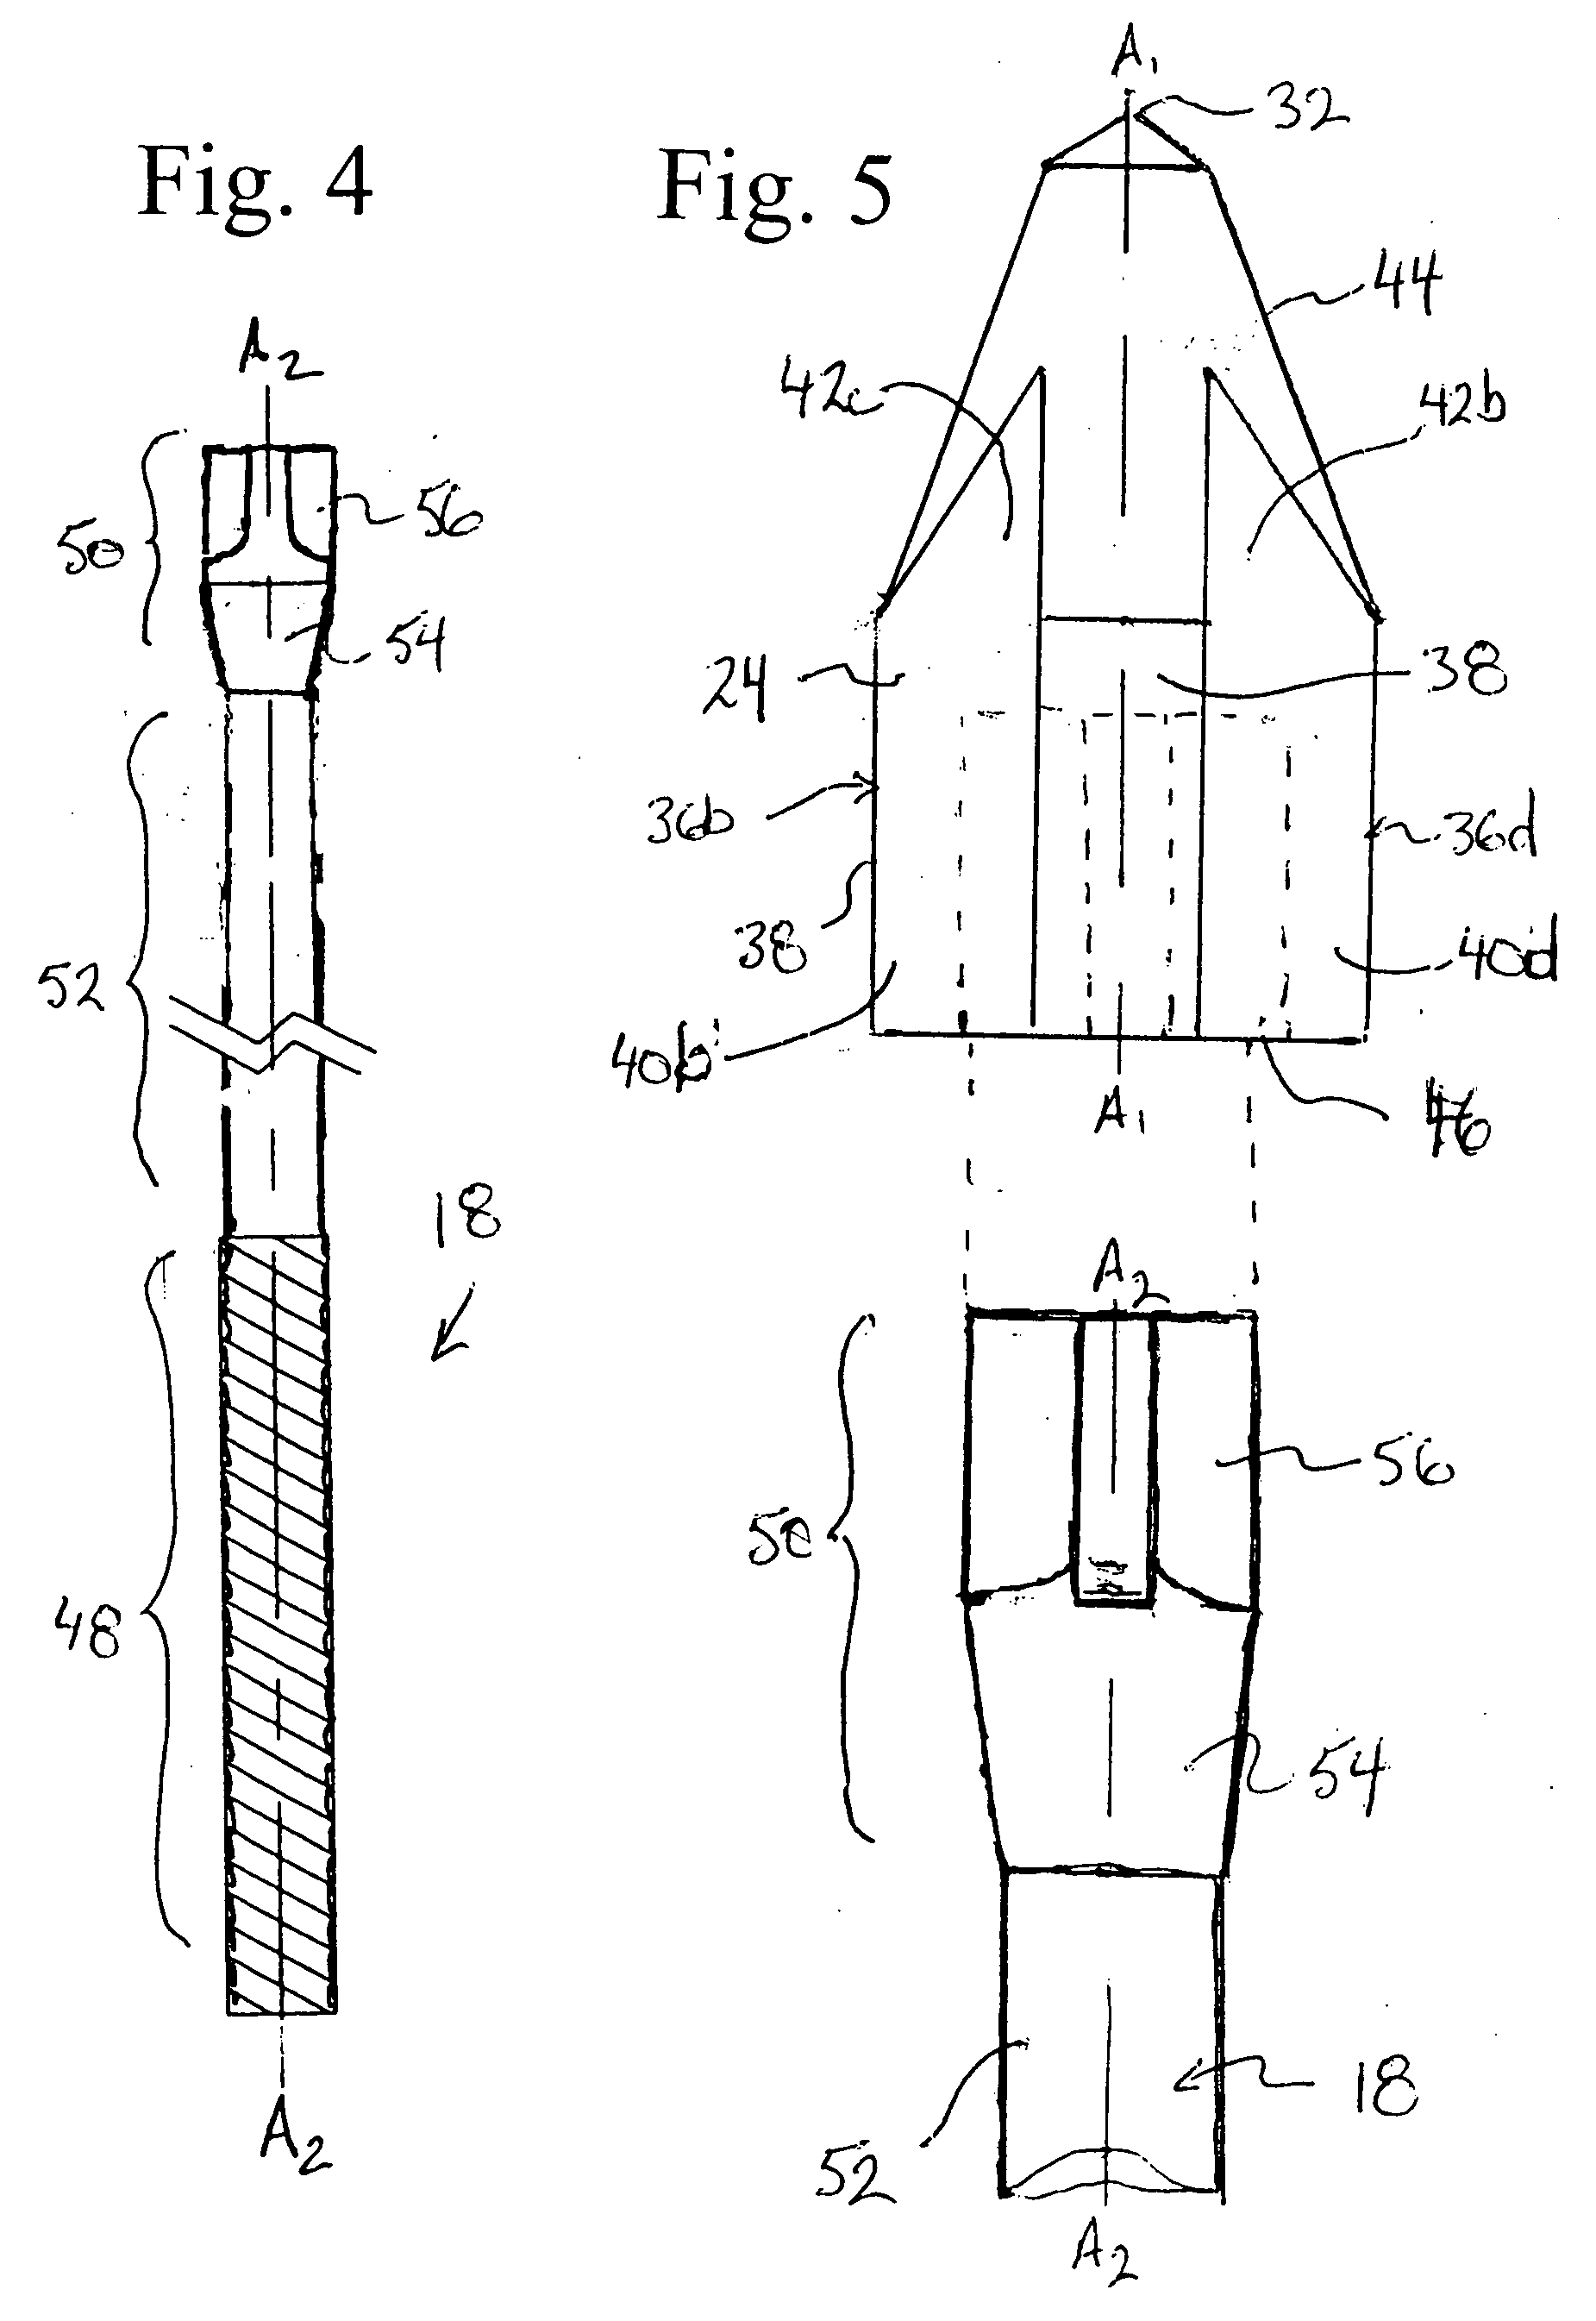 Detachable anchor bolt mixing head for use in mine roof support systems and method of using same